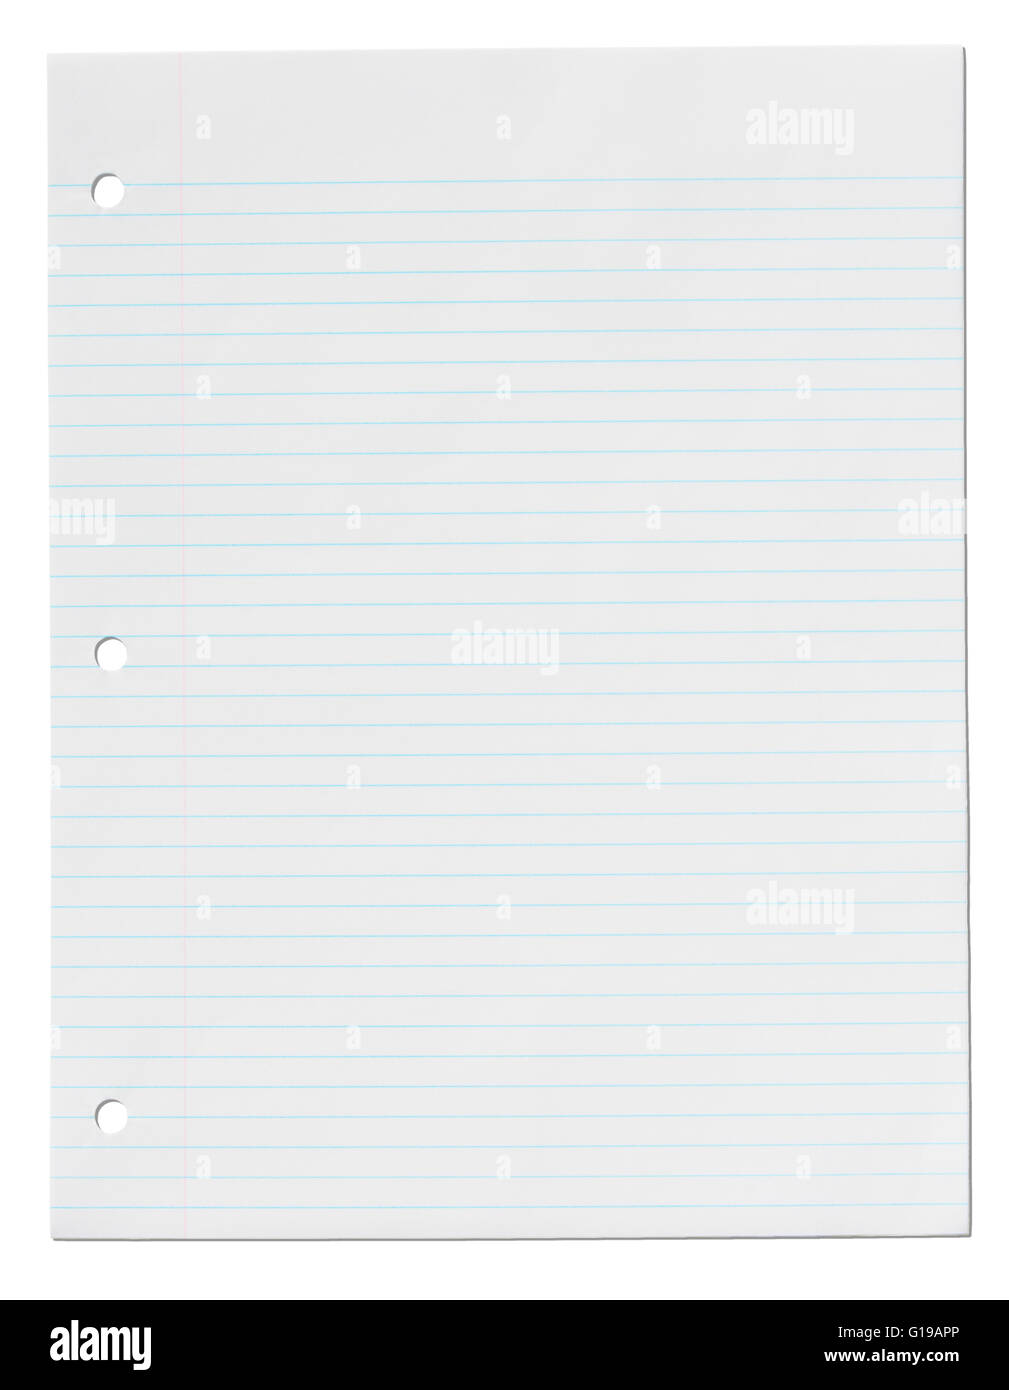 Blank sheet of paper. Lined paper with a fine line of shadow. Stock Photo